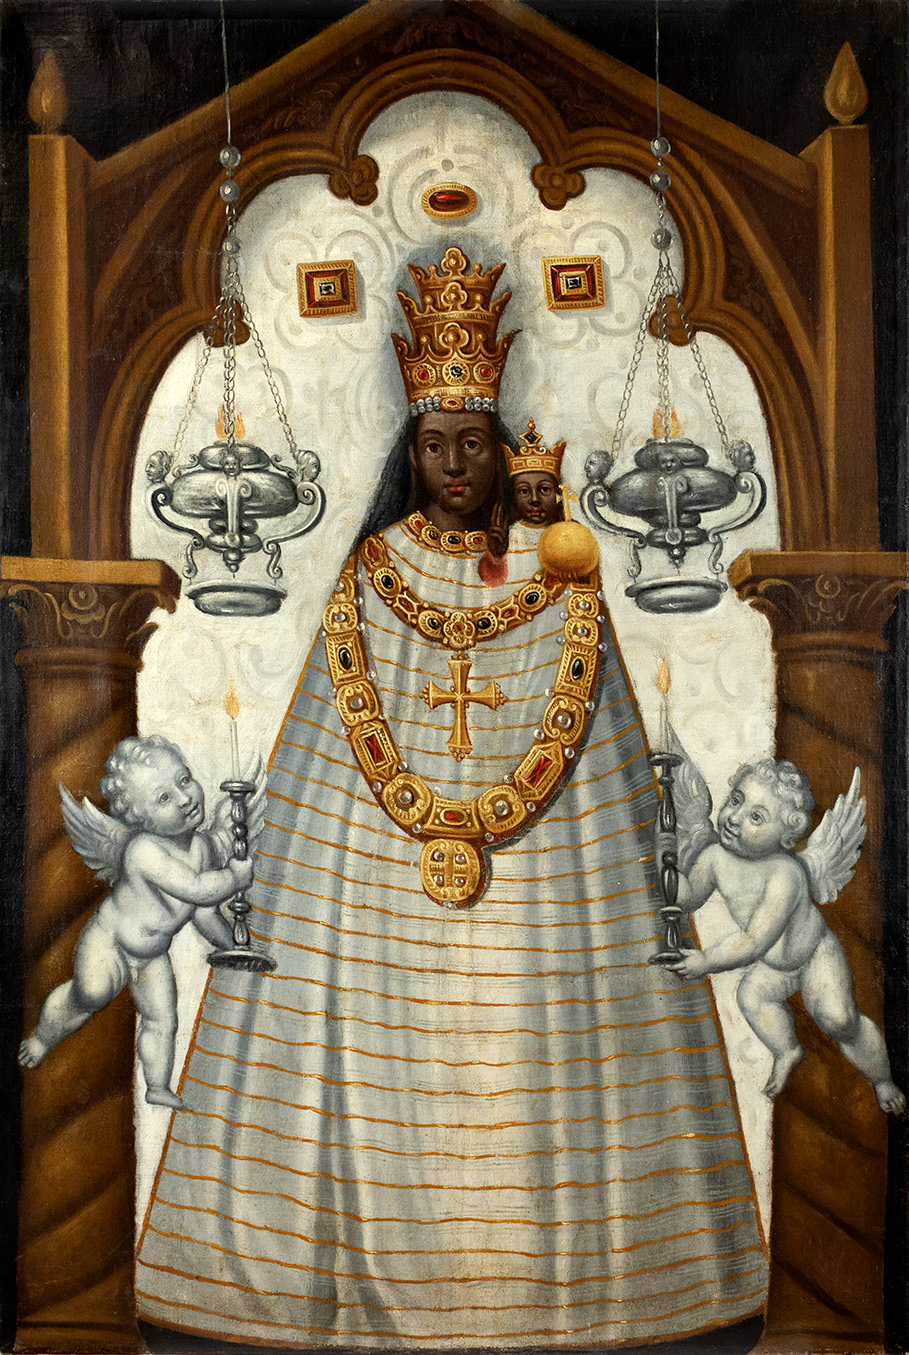 Peruvian oil painting of a dark-skinned Madonna